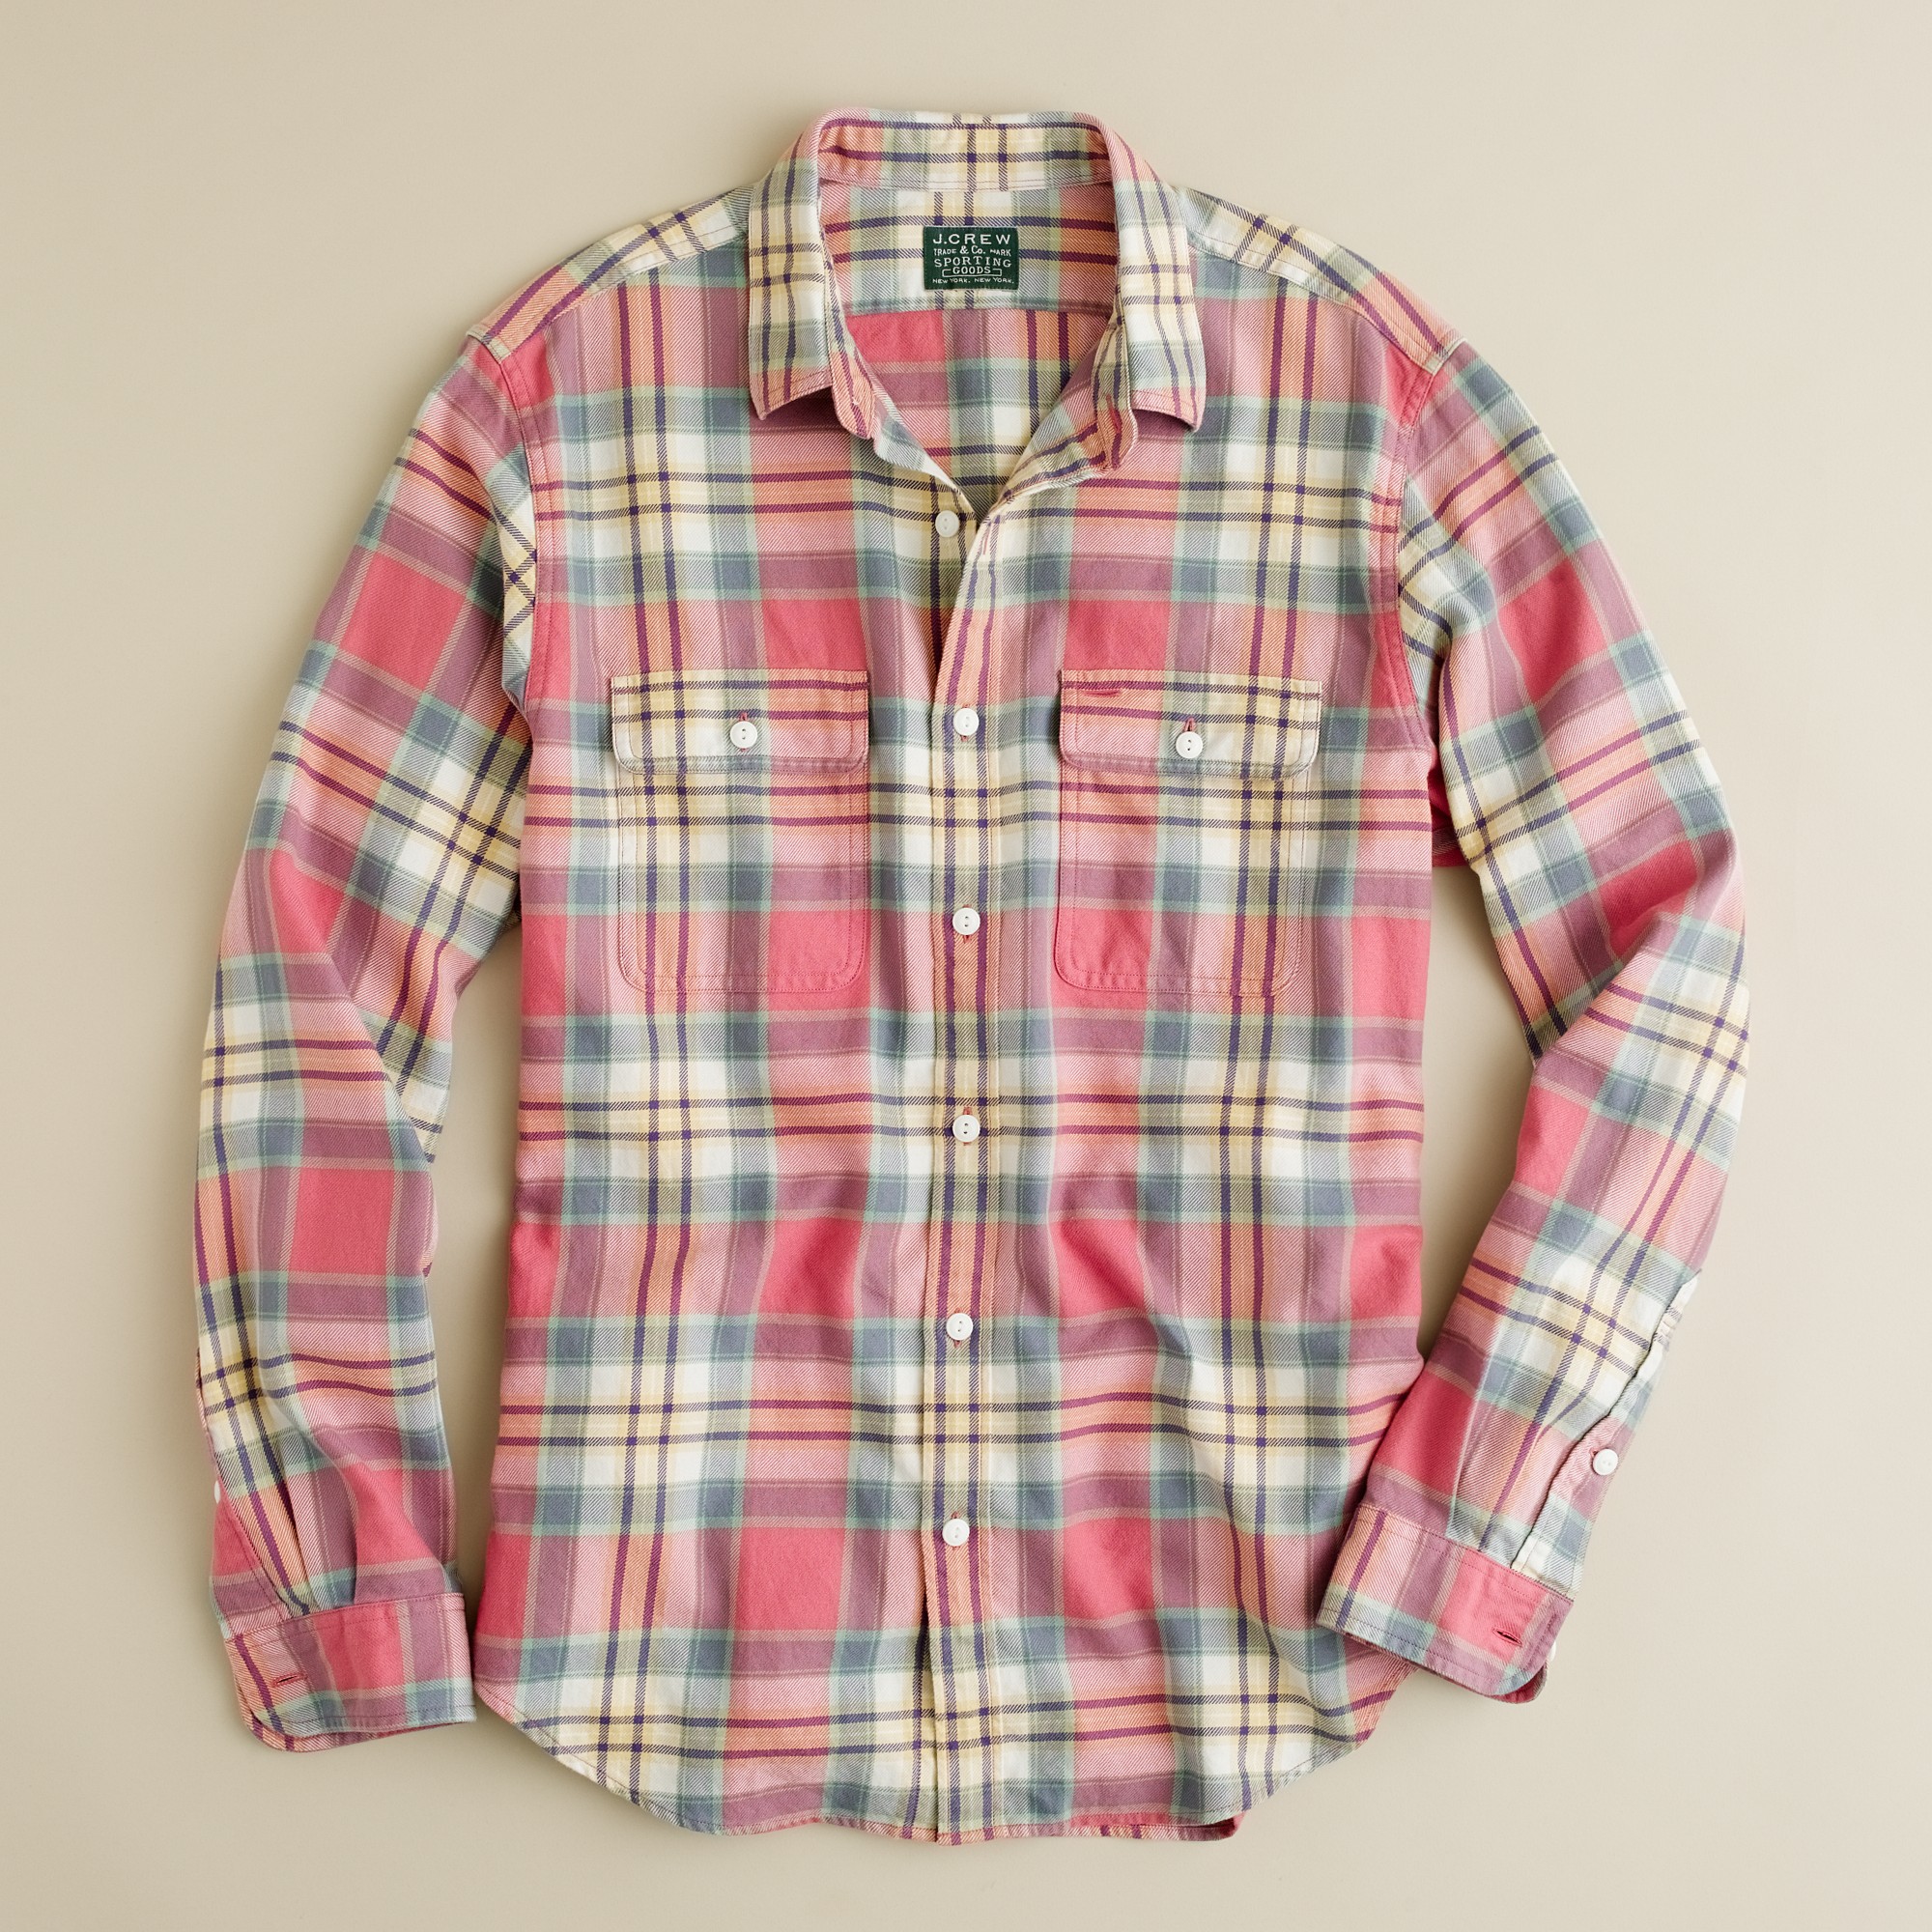 J.Crew Vintage Flannel Shirt in Amherst Plaid in Faded Red (Red) for